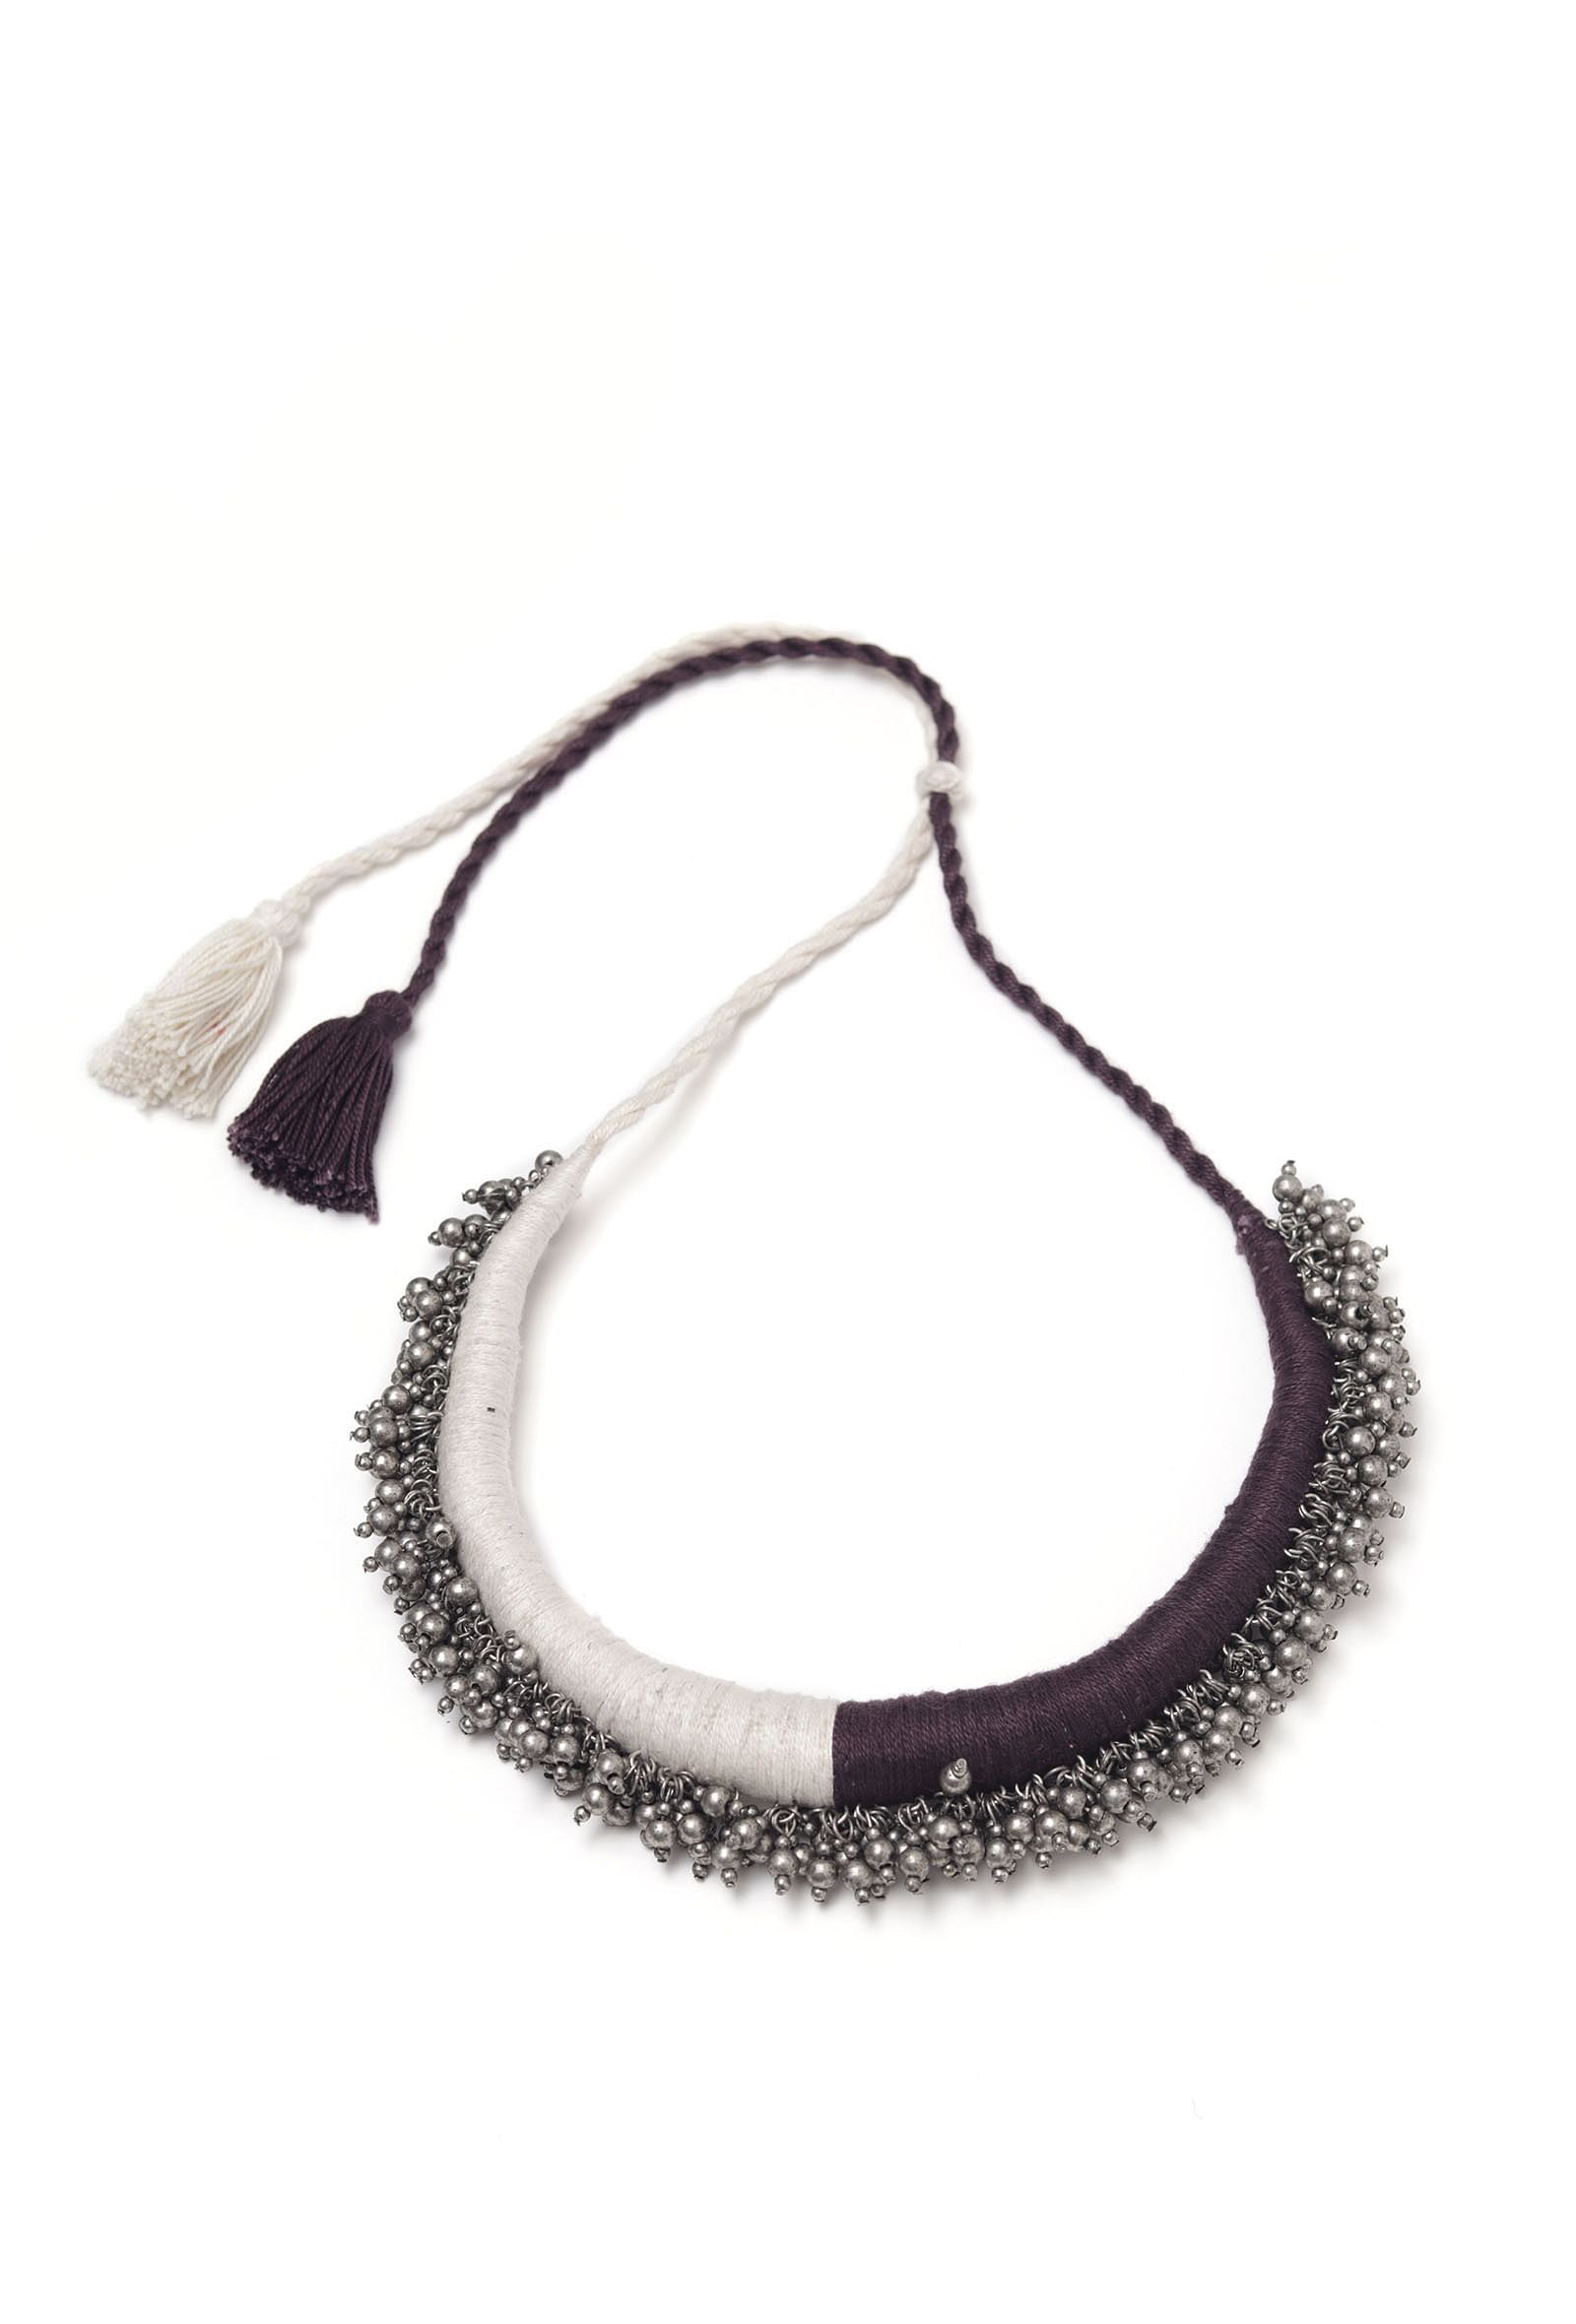 Kasima Duo Black and White Tribal Ghungroo Necklace